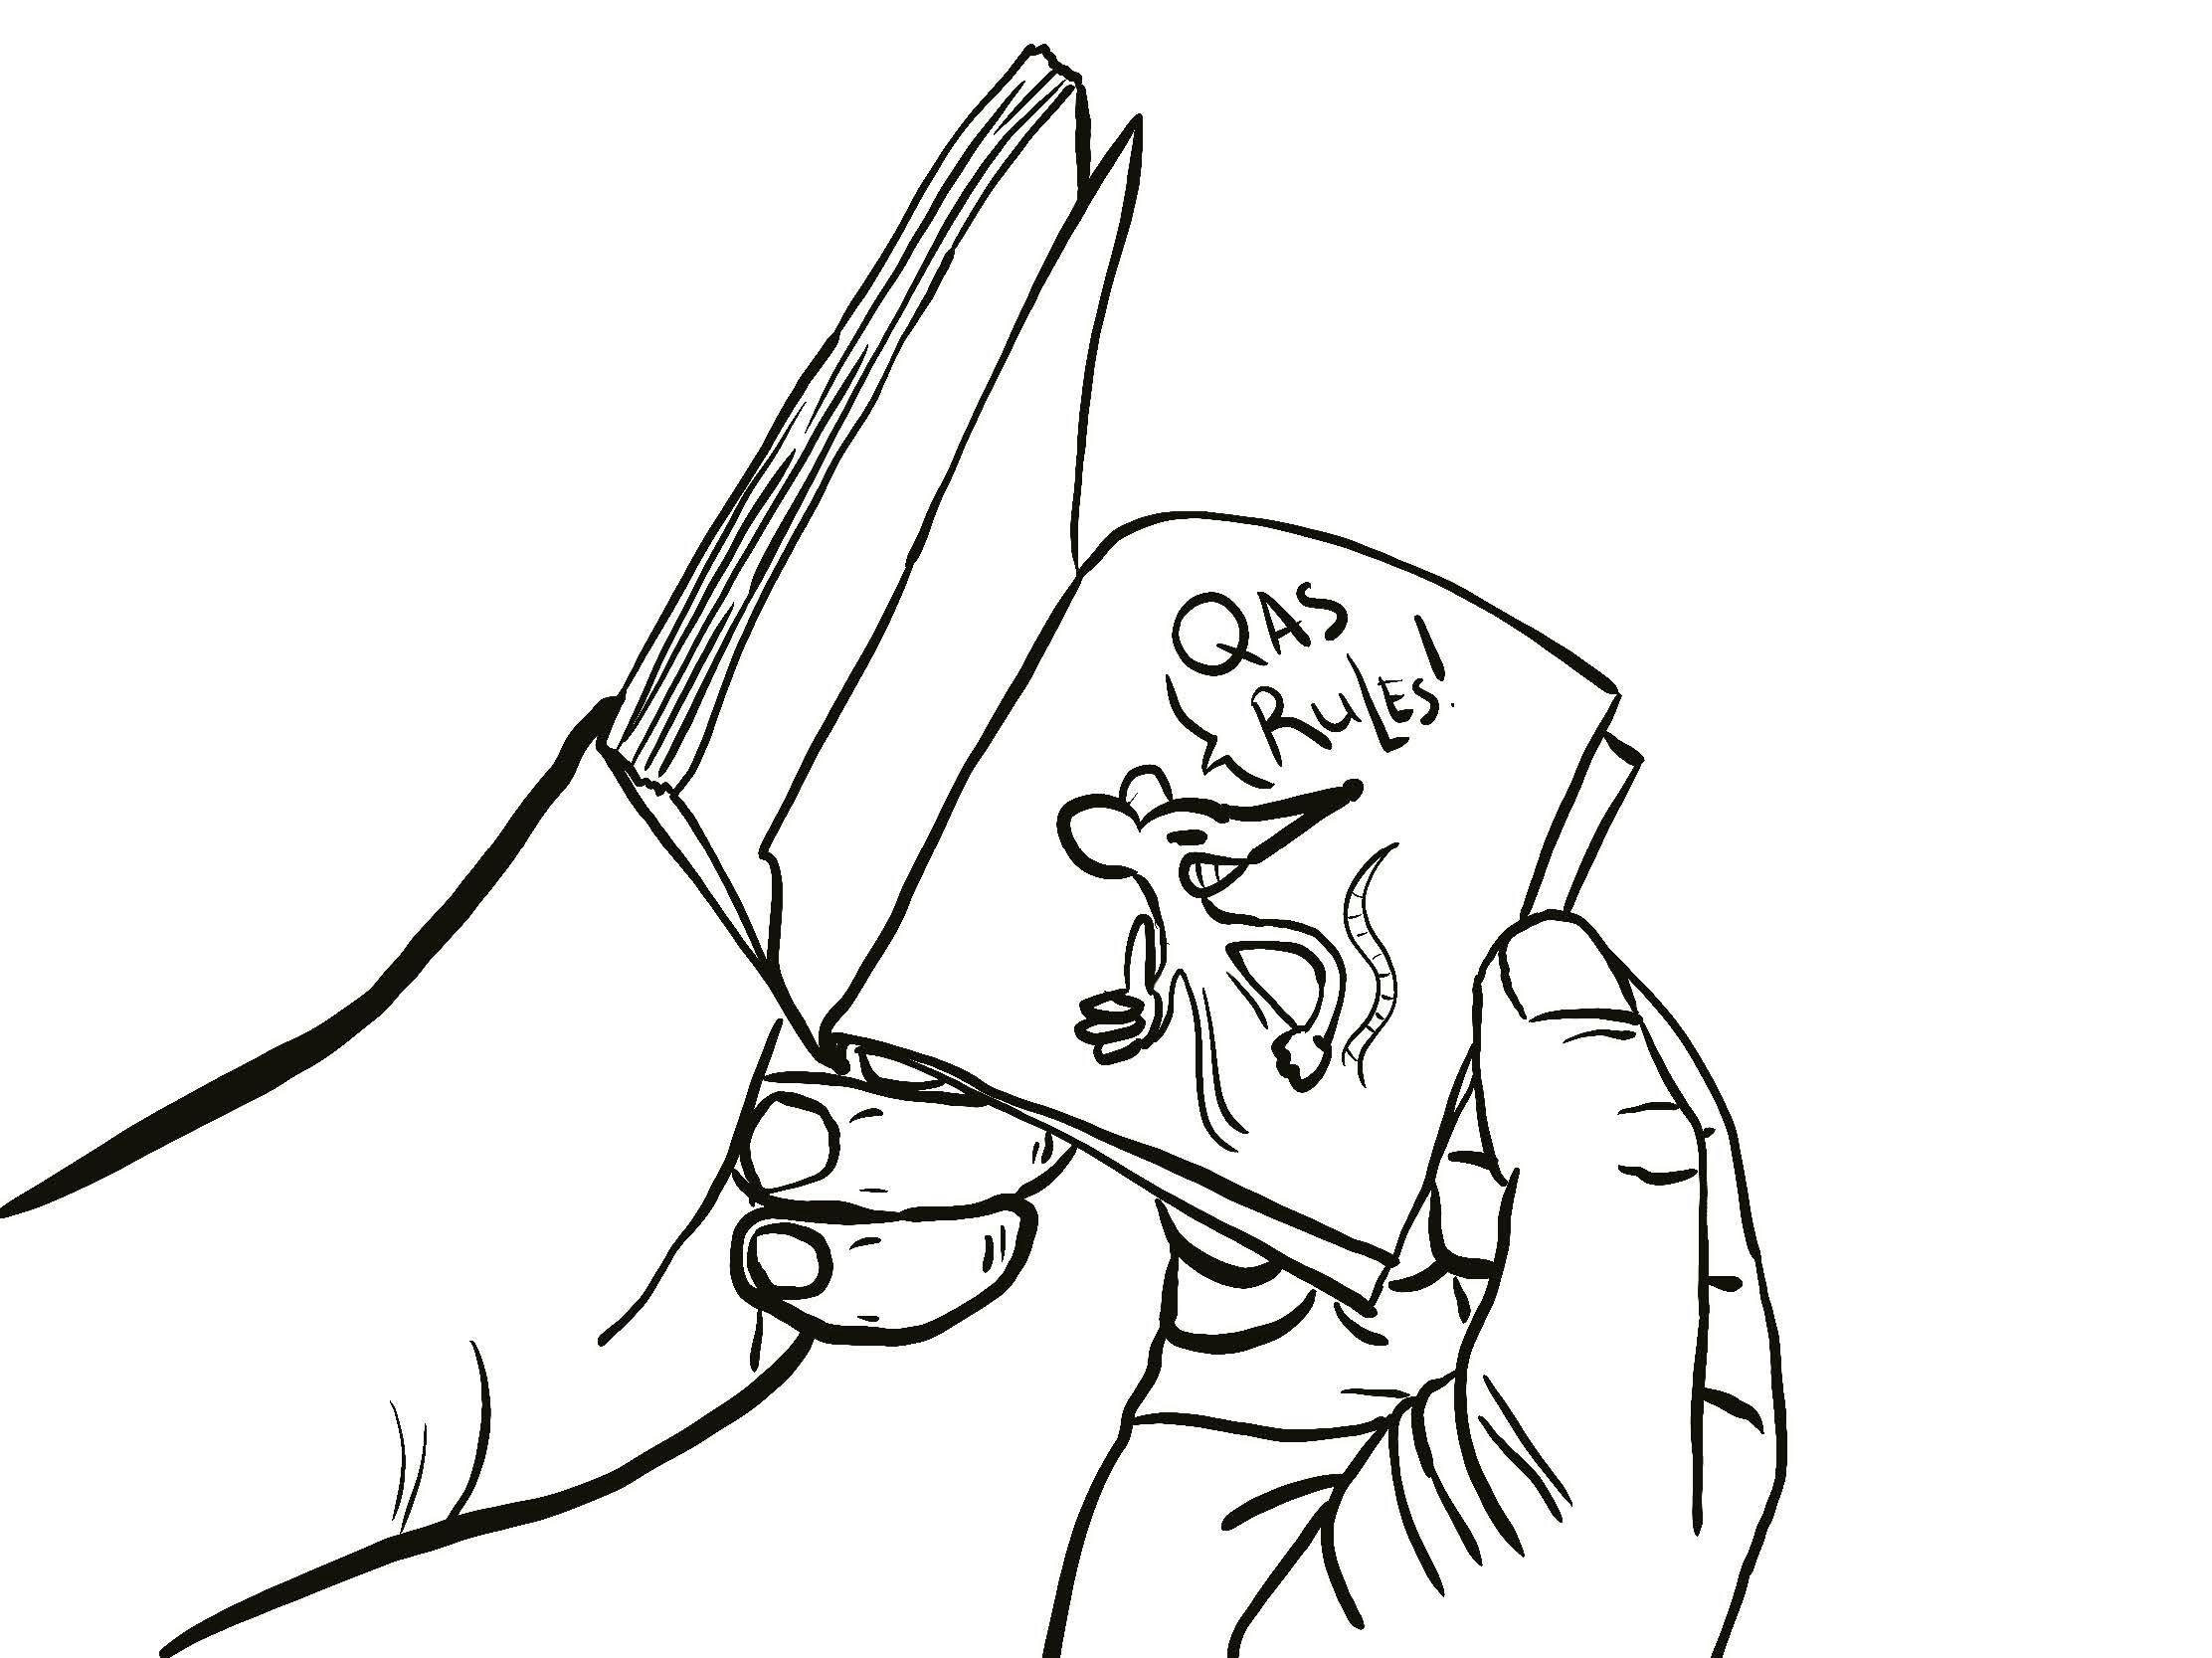 A drawing of a hand opening a flipbook. In the book is a drawing of Hamish the Rat saying "QAS Rules!"